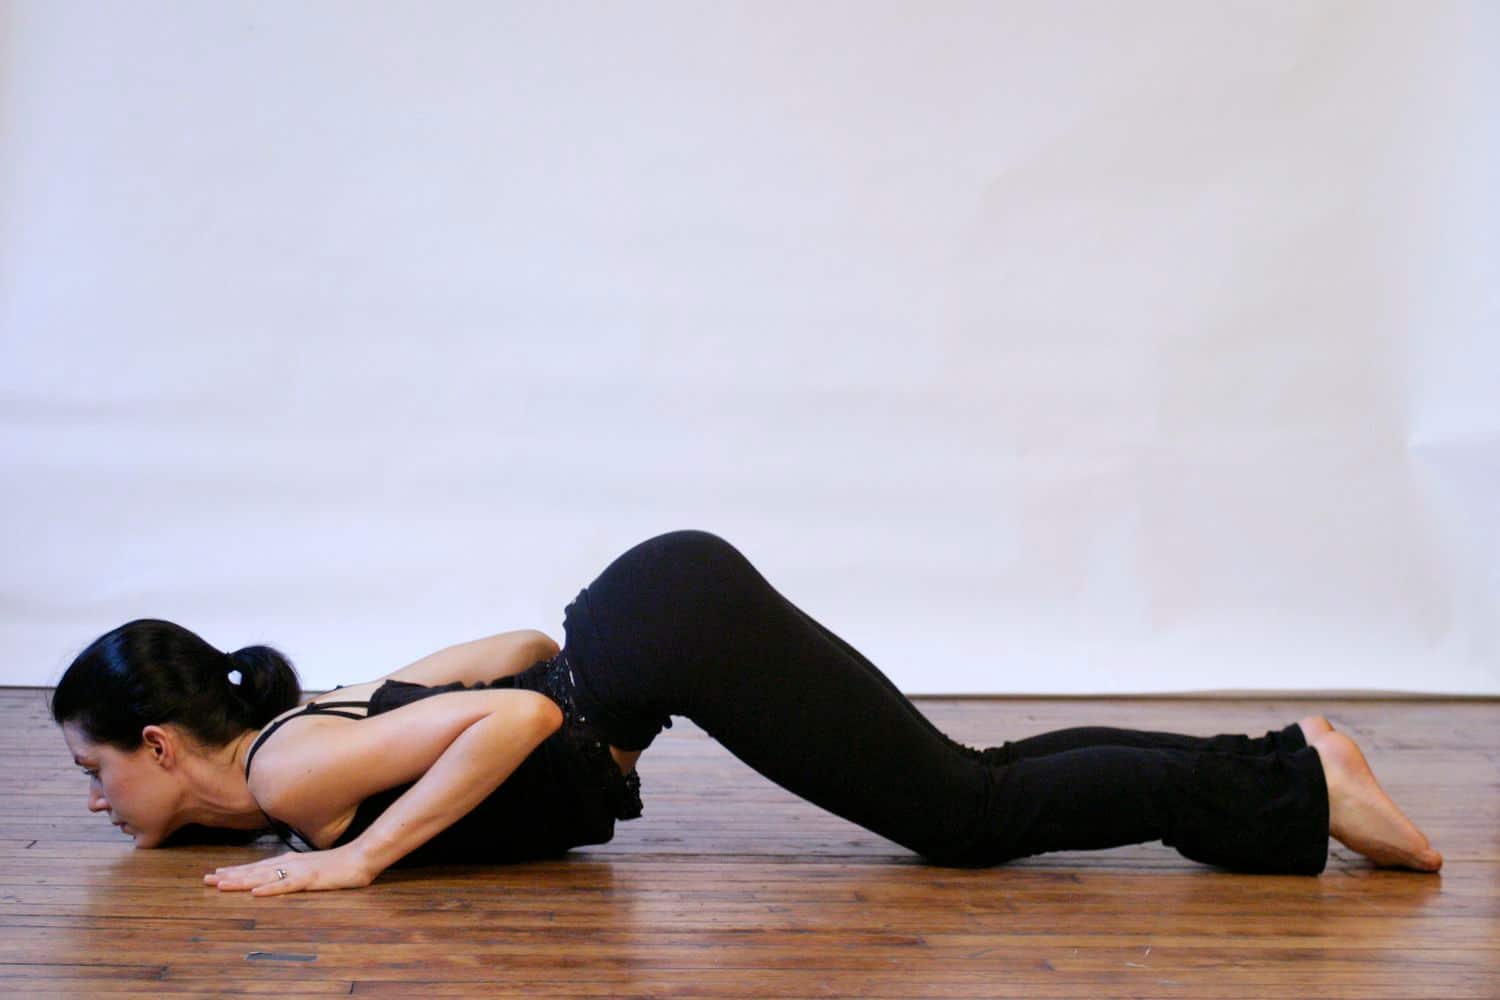 Practice These 10 Yoga Poses for Tight Hamstrings & to Gain Flexibility -  YOGA PRACTICE